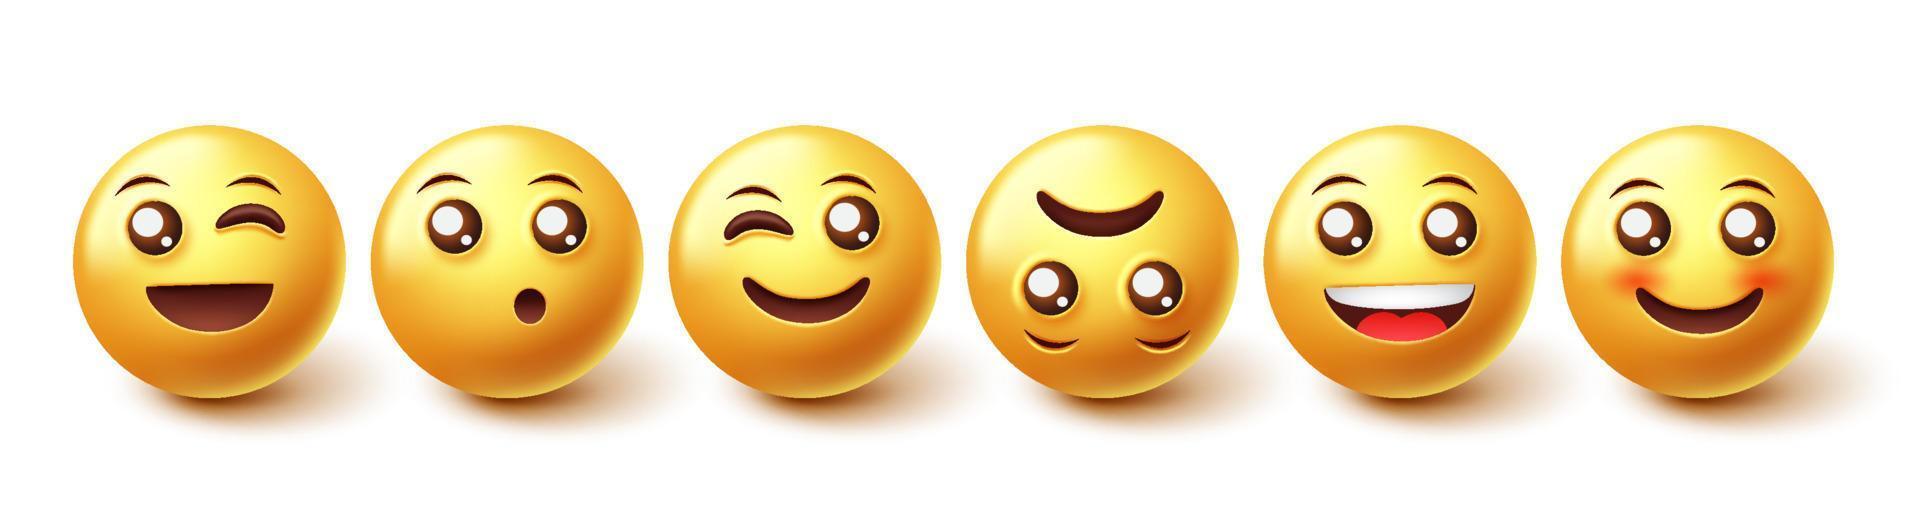 Emojis character vector set. Emoji face reaction collection in yellow icon faces isolated in white background for emoticon characters graphic design elements. Vector illustration.